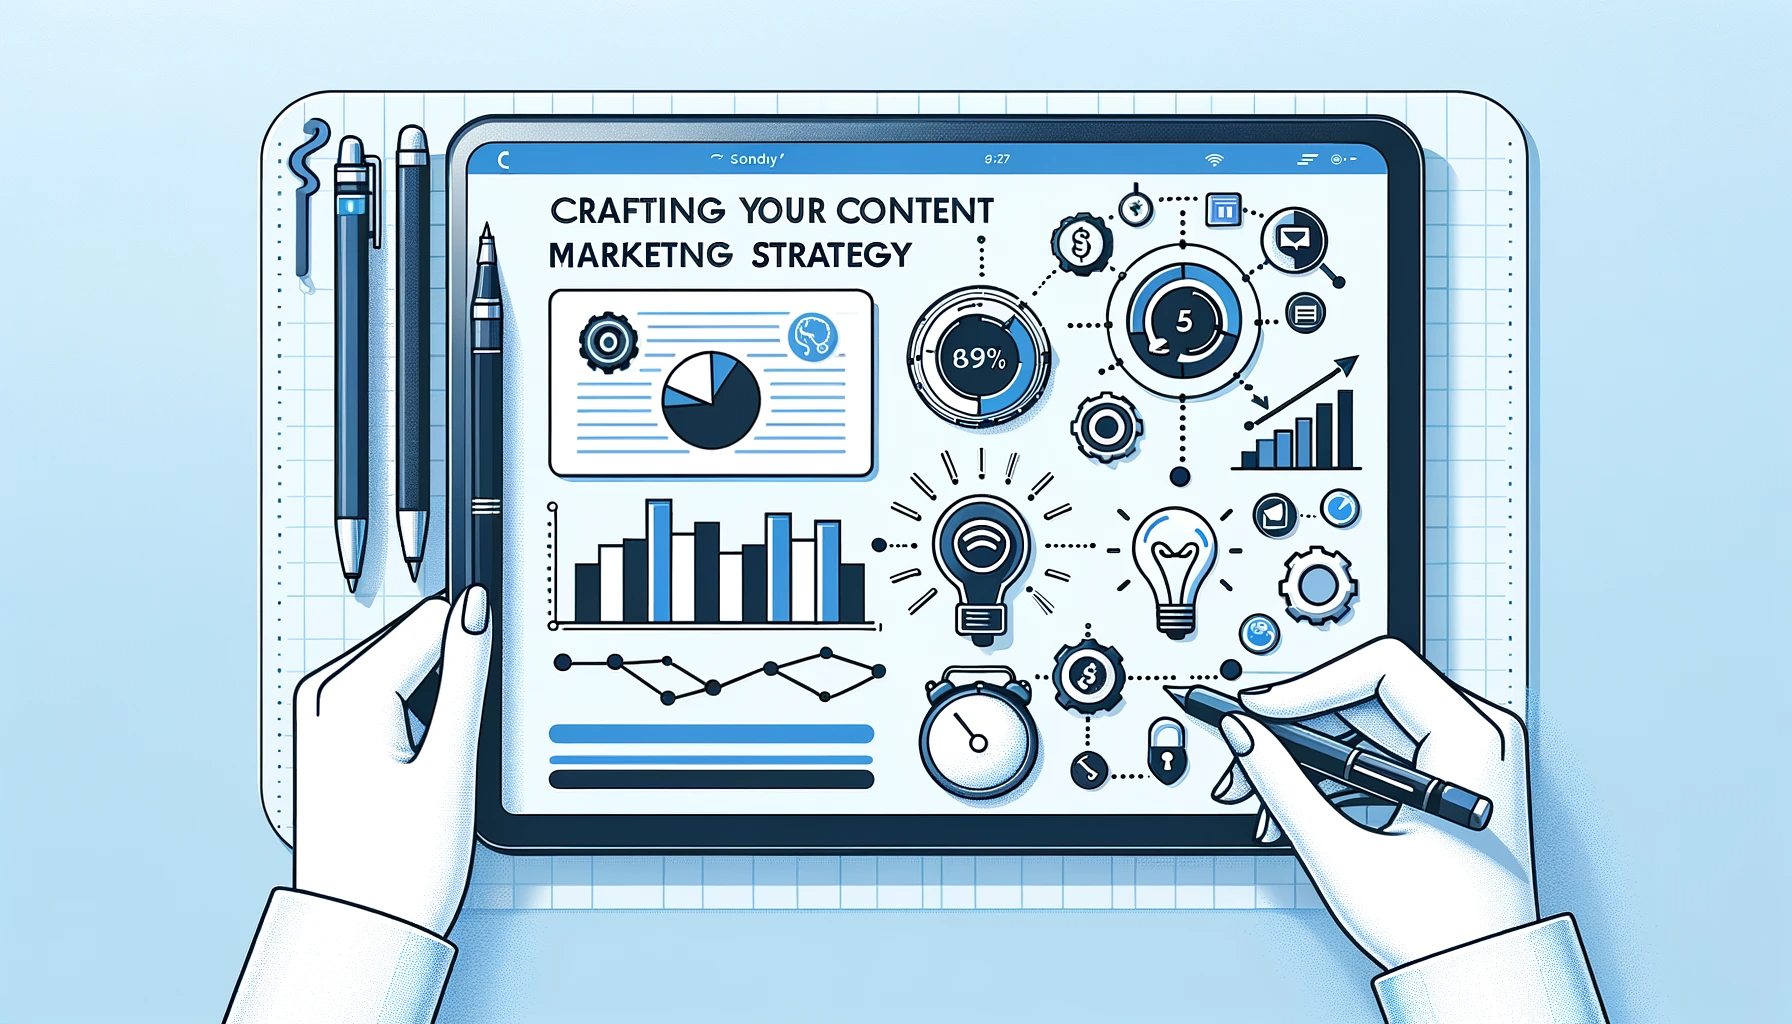 Crafting Your Content Marketing Strategy
